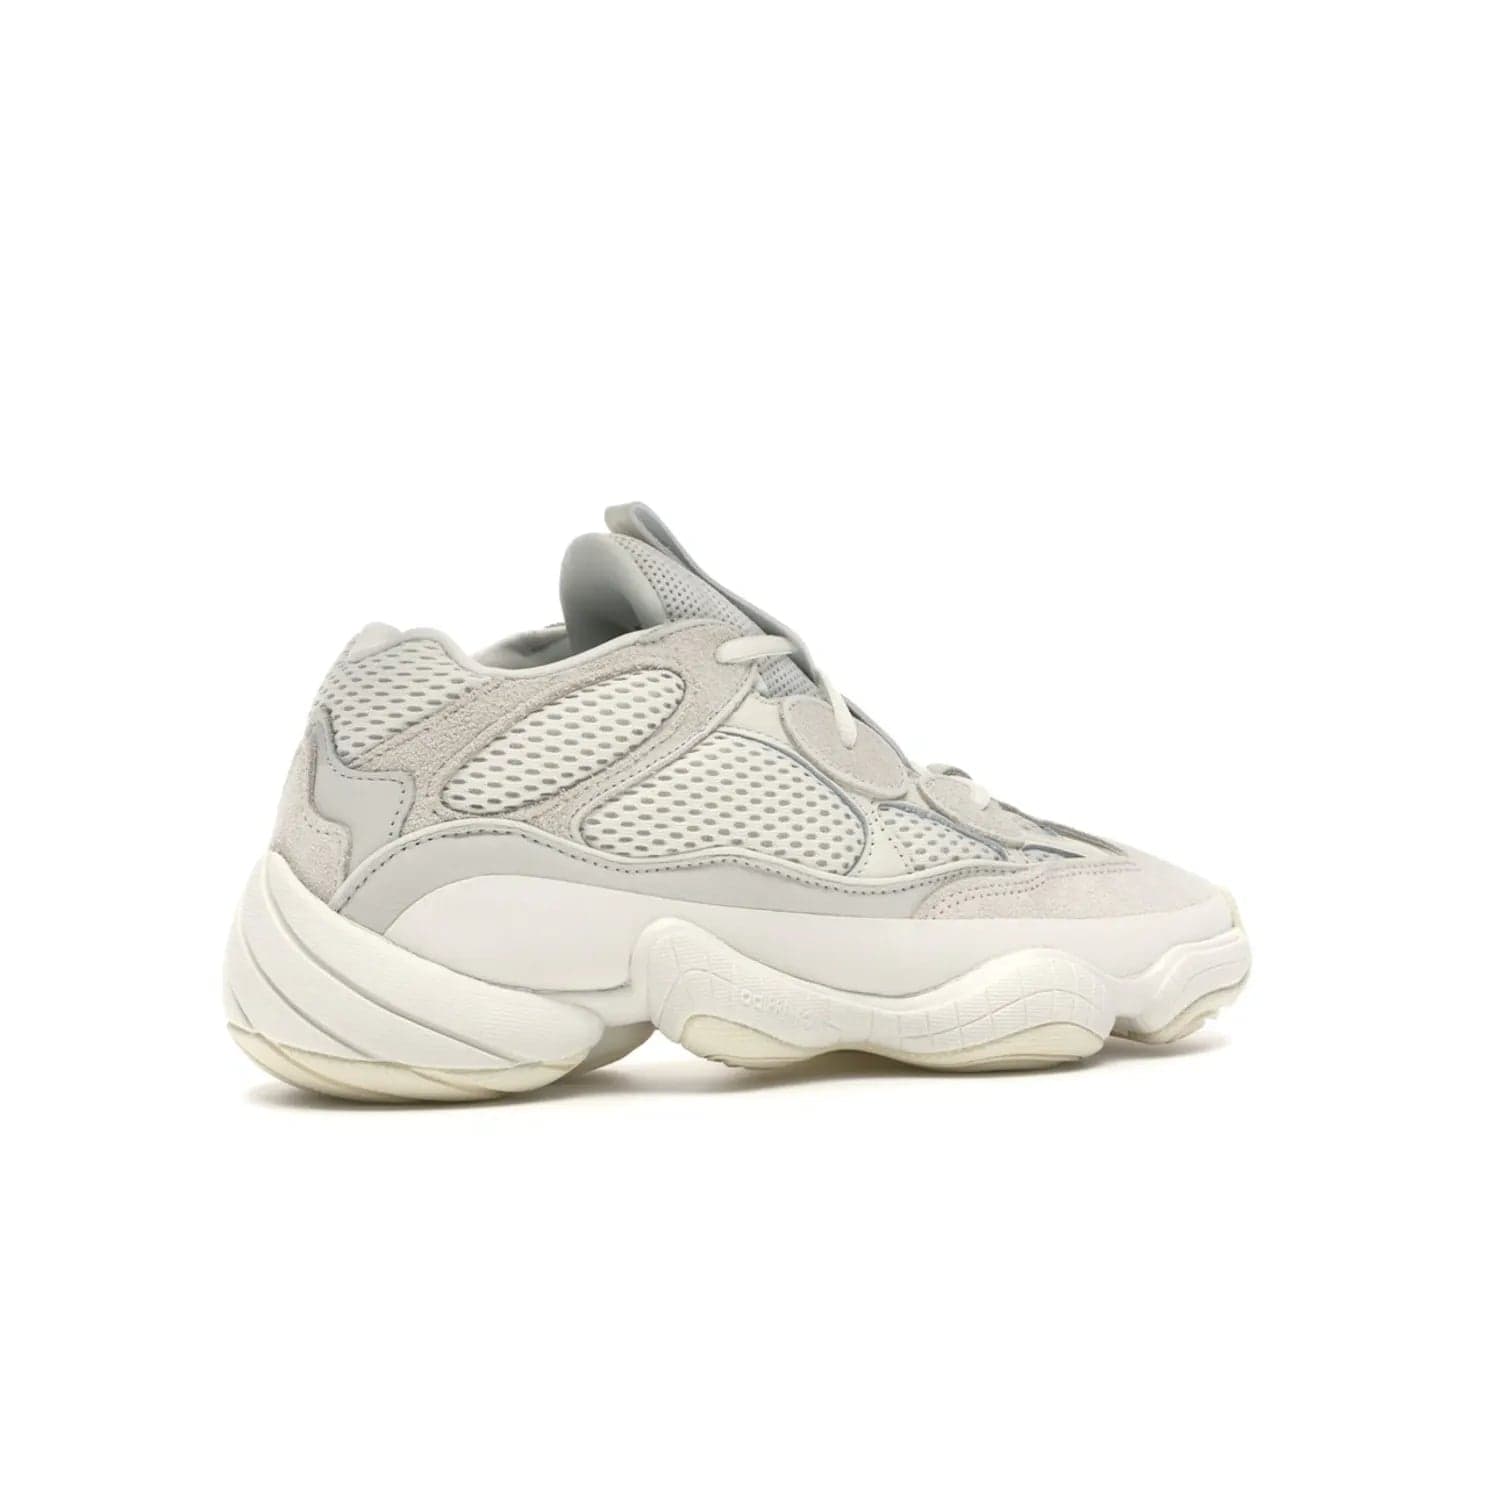 adidas Yeezy 500 Bone White - Image 34 - Only at www.BallersClubKickz.com - Classic look perfect for any sneaker collection. The adidas Yeezy 500 "Bone White" blends a white mesh upper with suede overlays & a chunky midsole inspired by the Adidas KB3. Complimented by a tonal-cream outsole, this timeless style is a must-have.